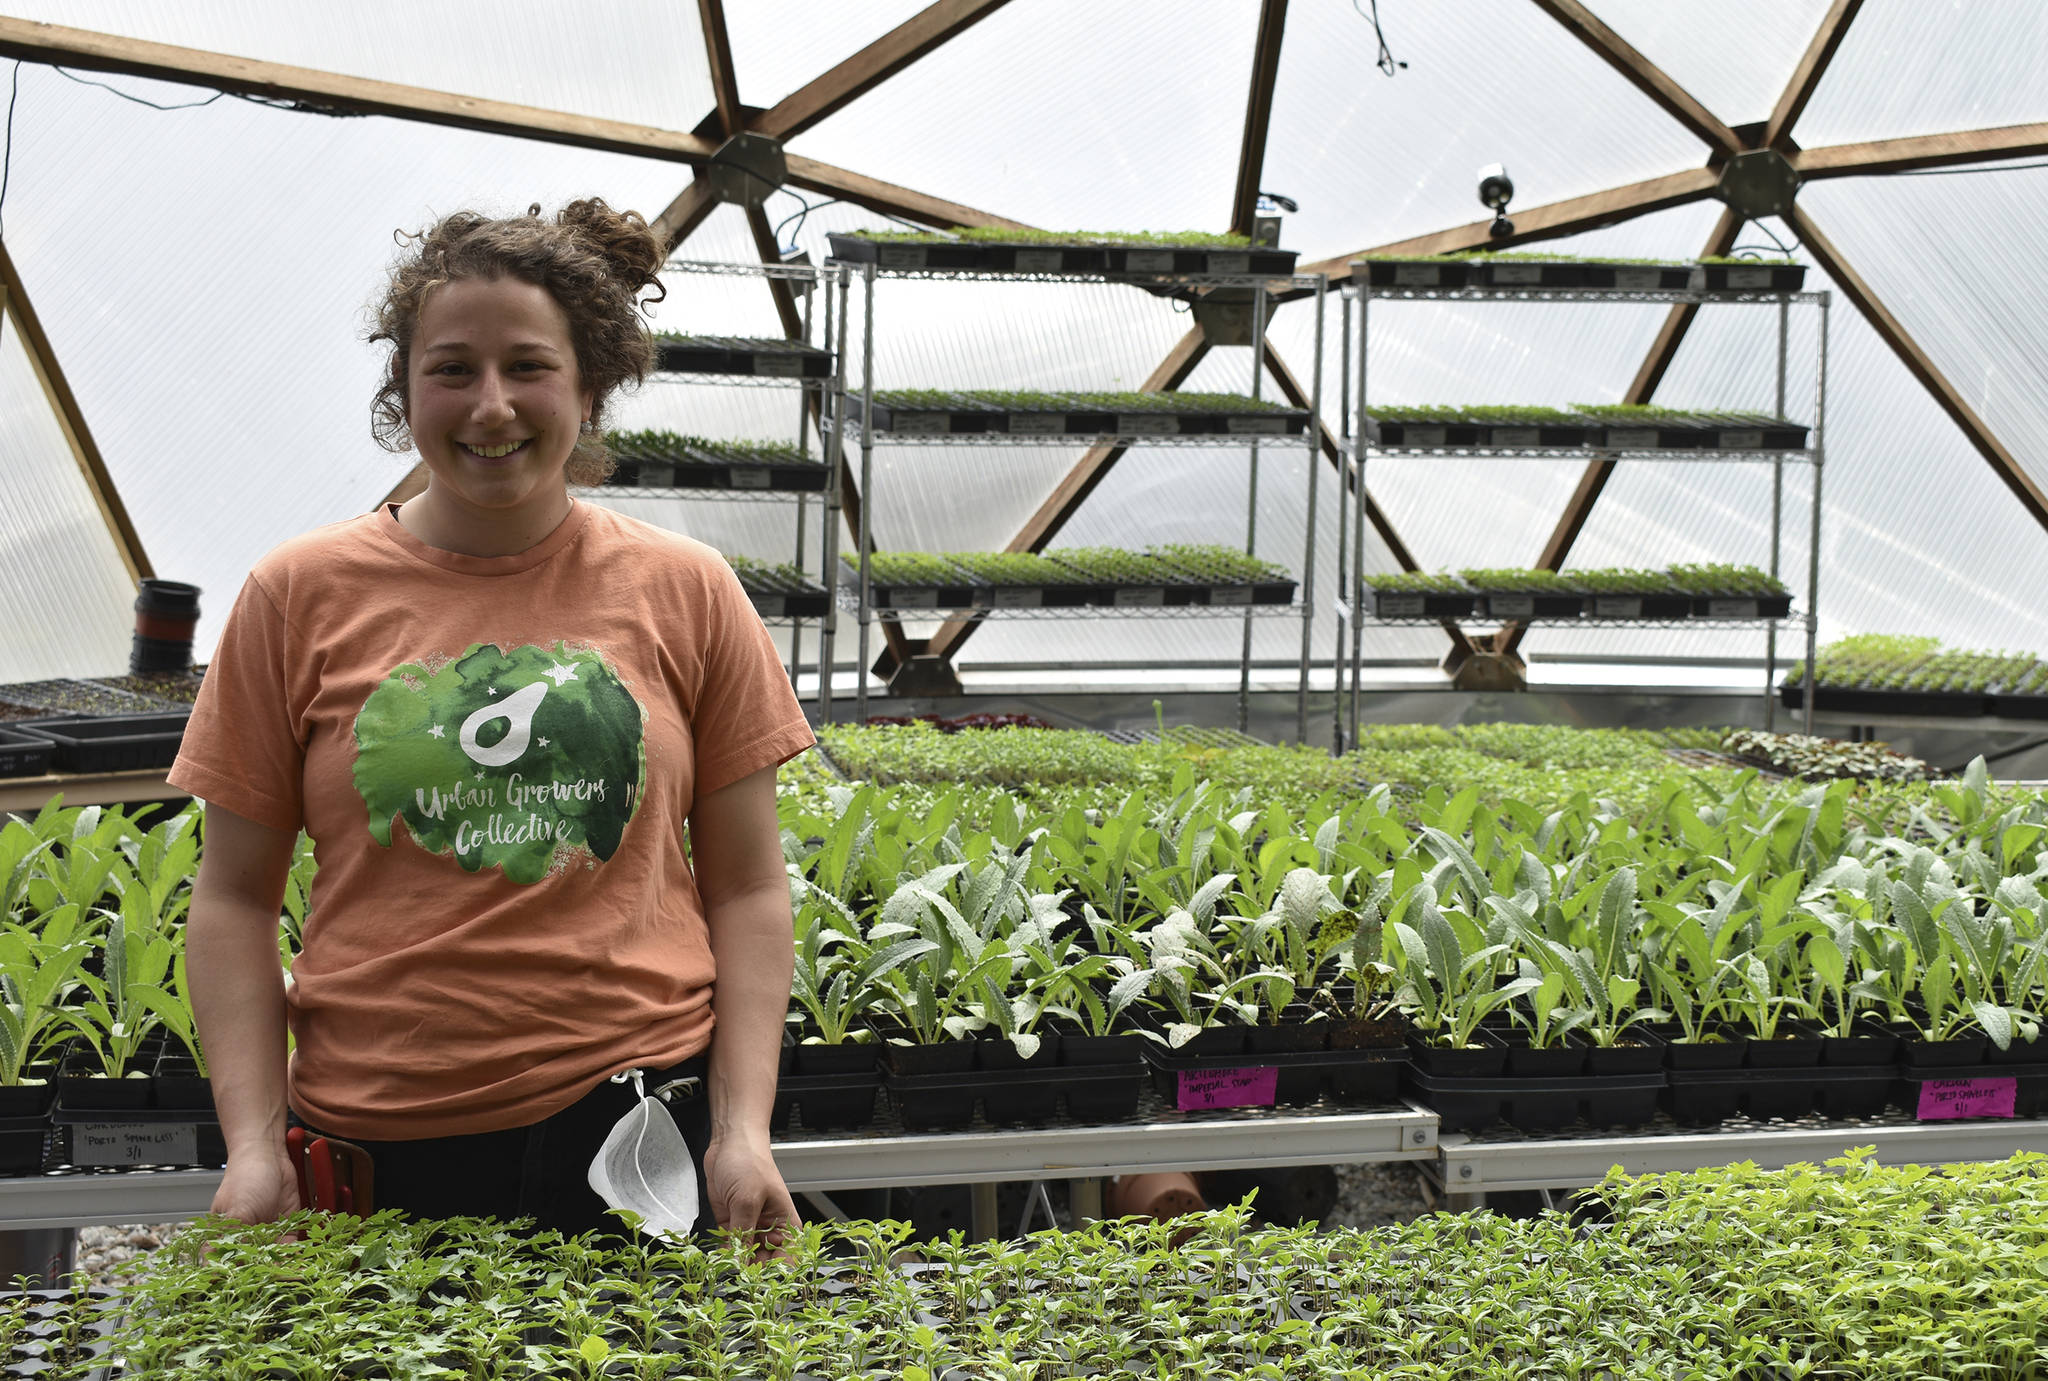 This April 10, 2020, photo shows Allison Sturm, Urban Farm Assistant, at the Urban Growers Collective farm in Chicago. The nonprofit teaches young kids and others to grow vegetables at eight urban farms around the city. While their spring educational programs are on hold due to rules on social distancing, Laurell Sims, the co-founder, said they are still focusing on food production and getting produce to families that need it. (Laurell Sims via AP)